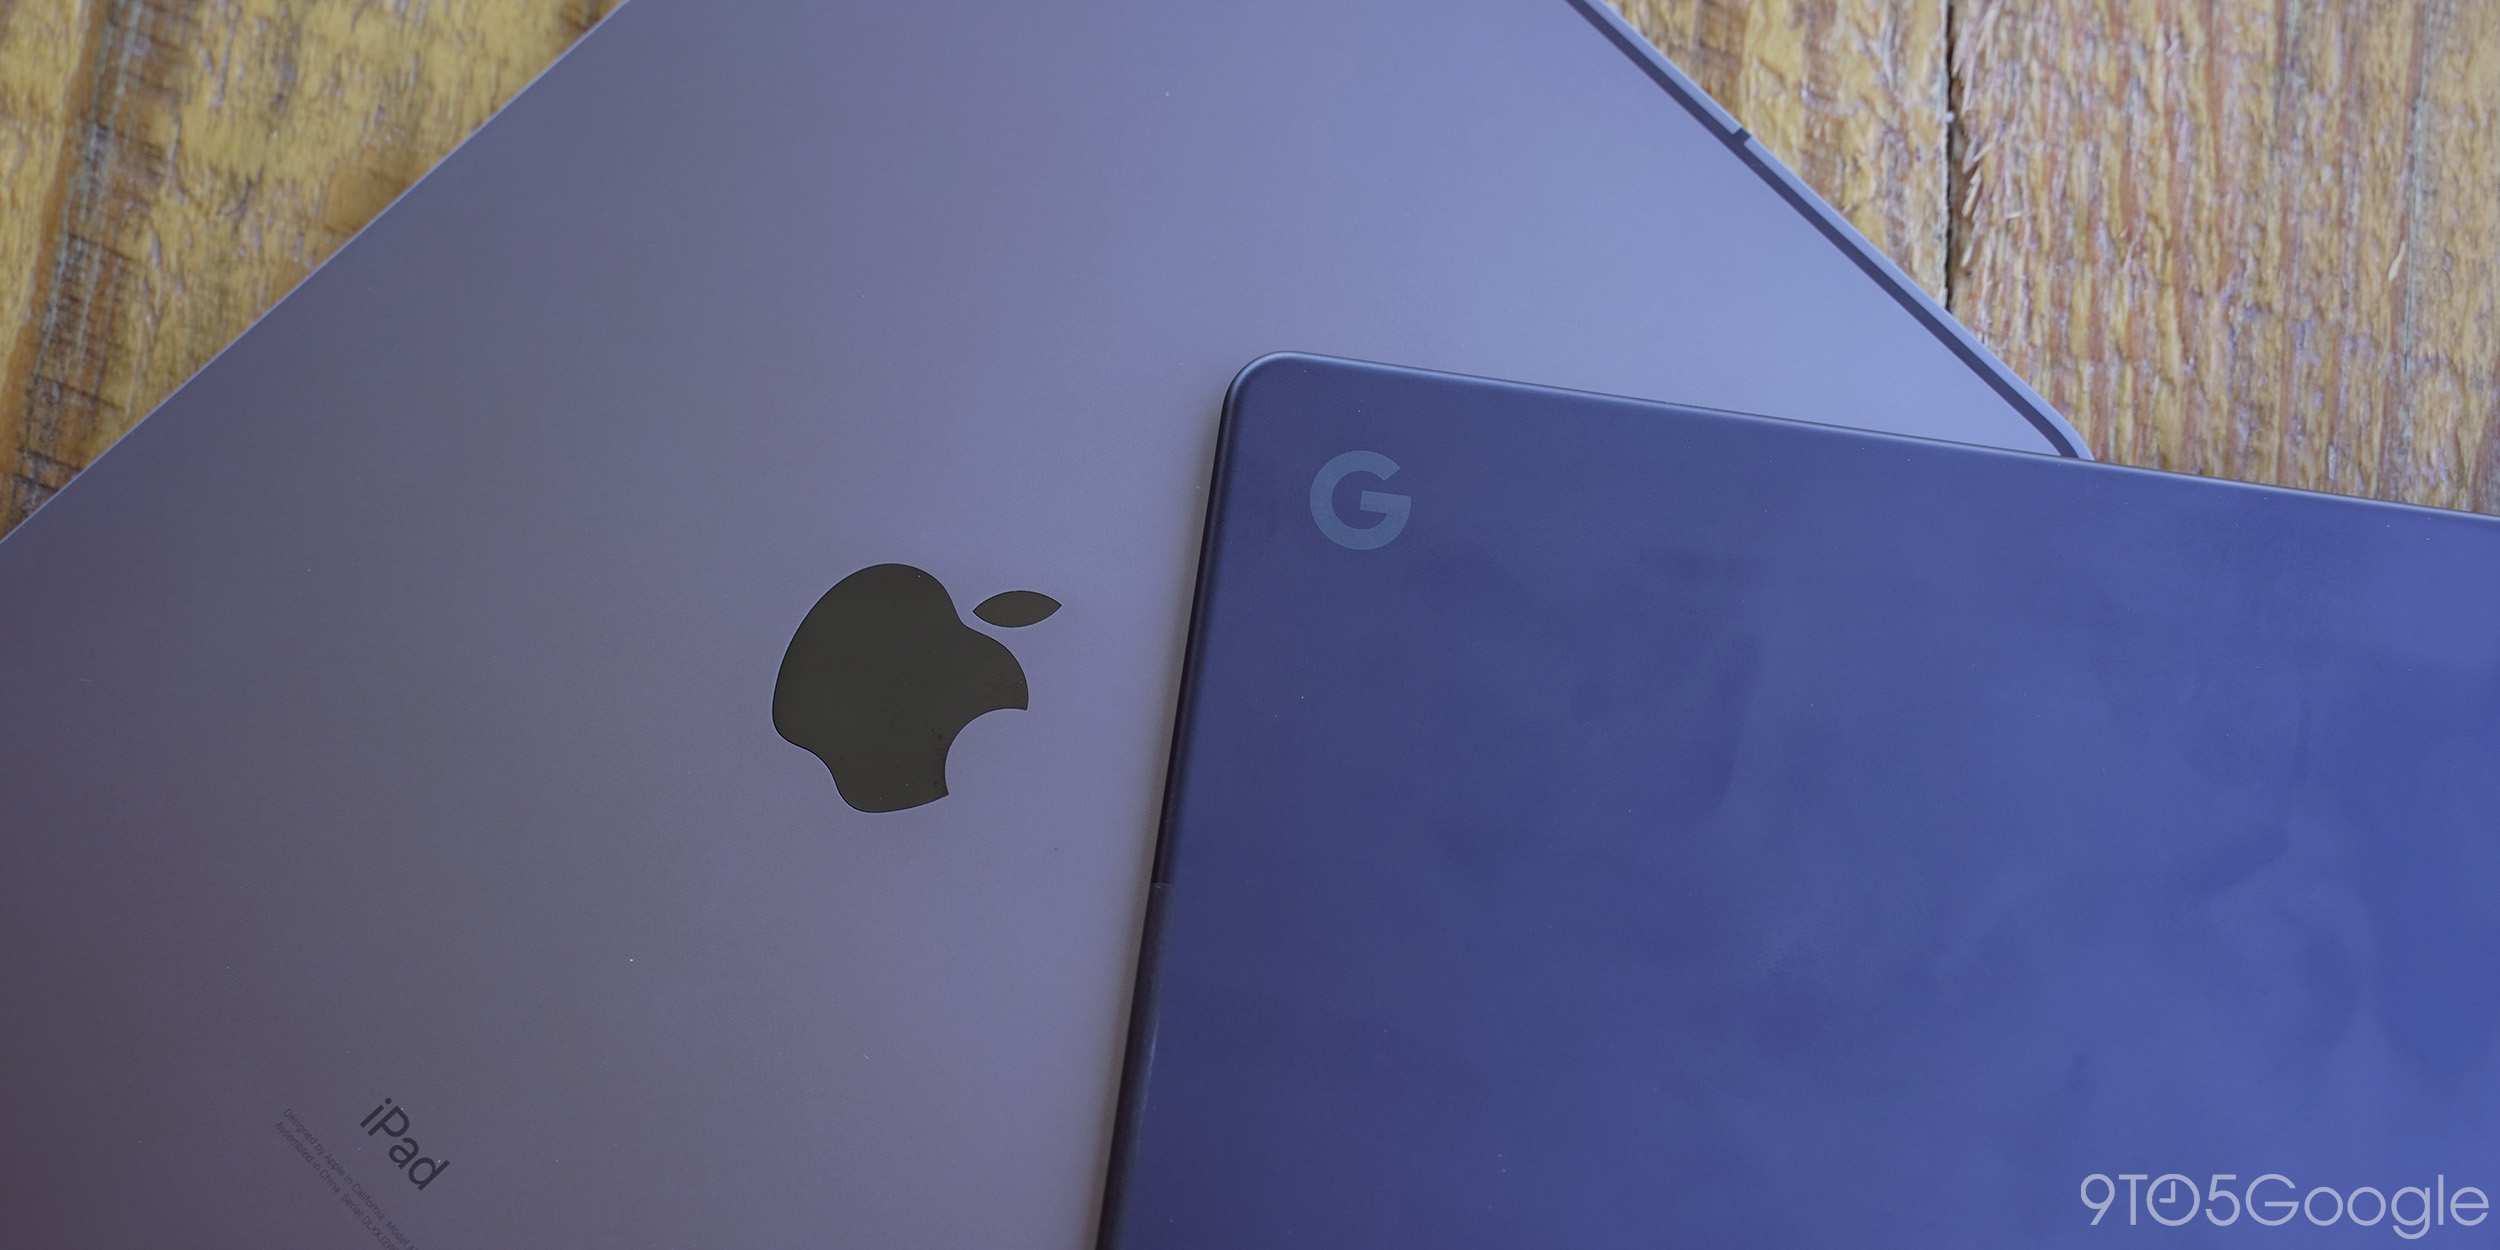 Pixel Slate m3 Is Google's new base model worth buying? 9to5Google